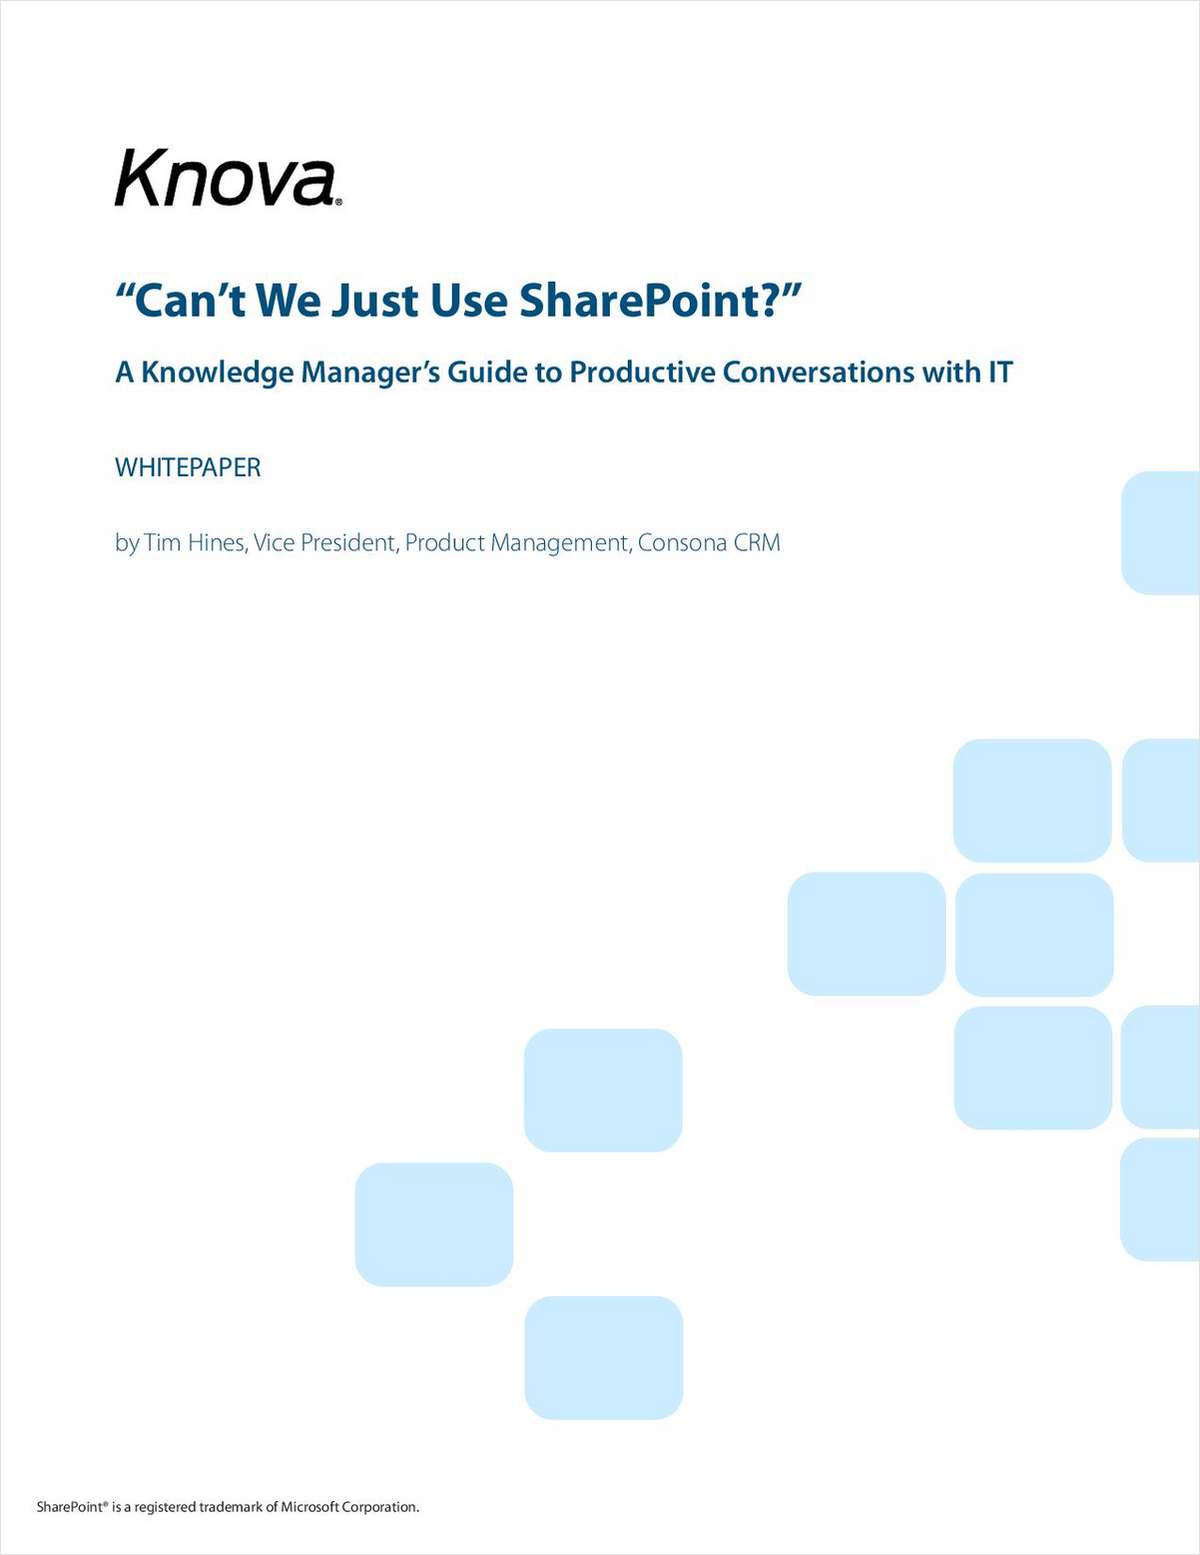 Can't We Just Use SharePoint? A Knowledge Manager's Guide to Productive Conversations with IT